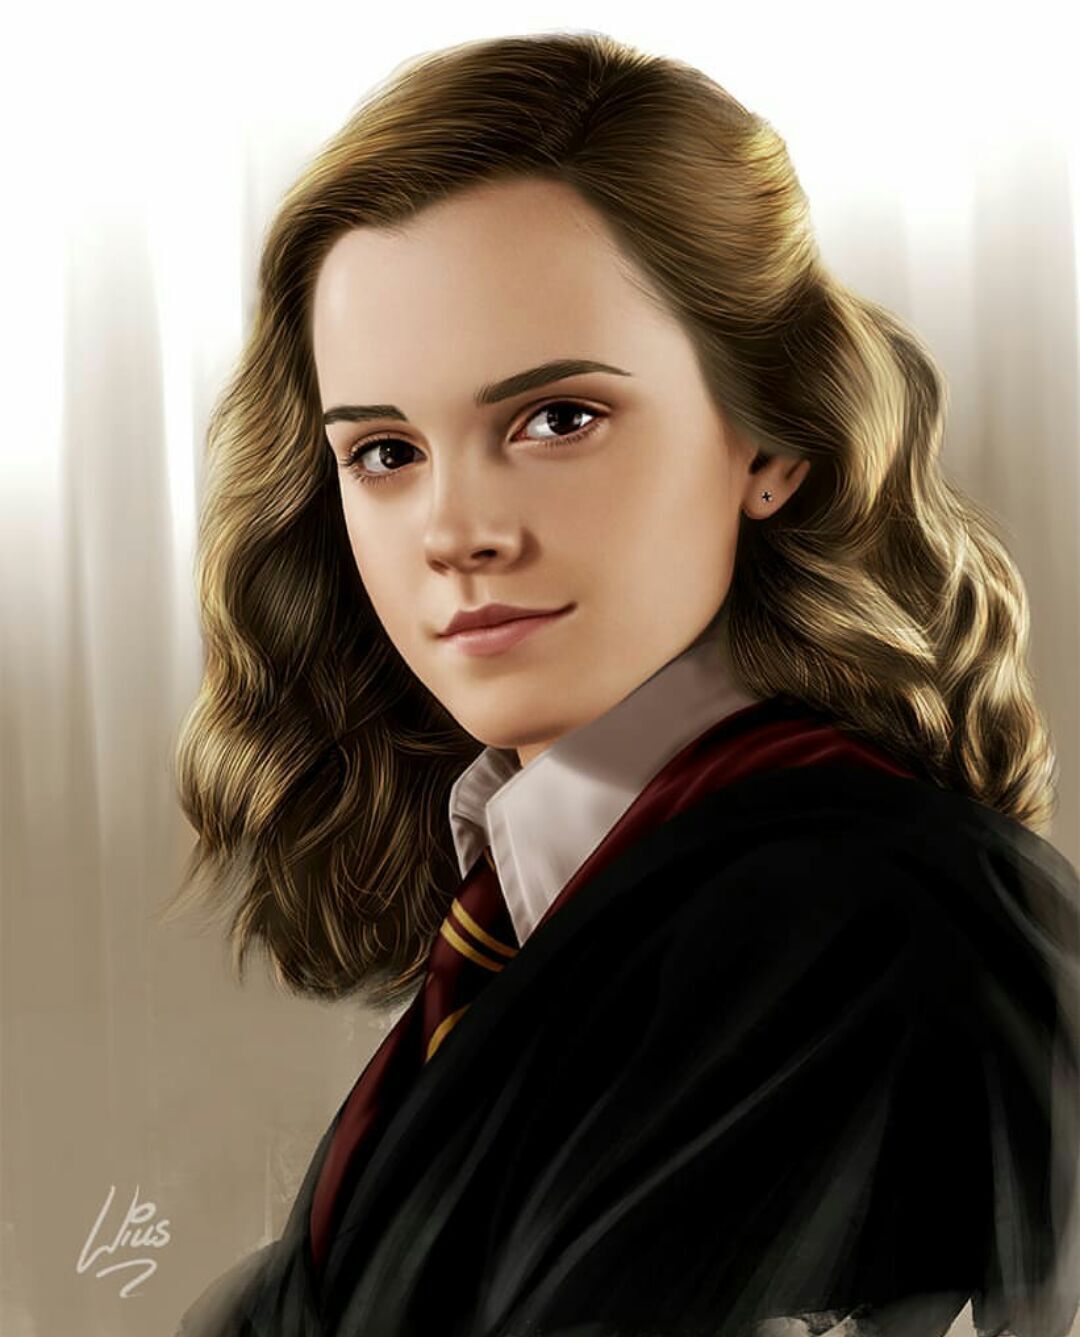 alexa gustafson recommends images of hermione in harry potter pic